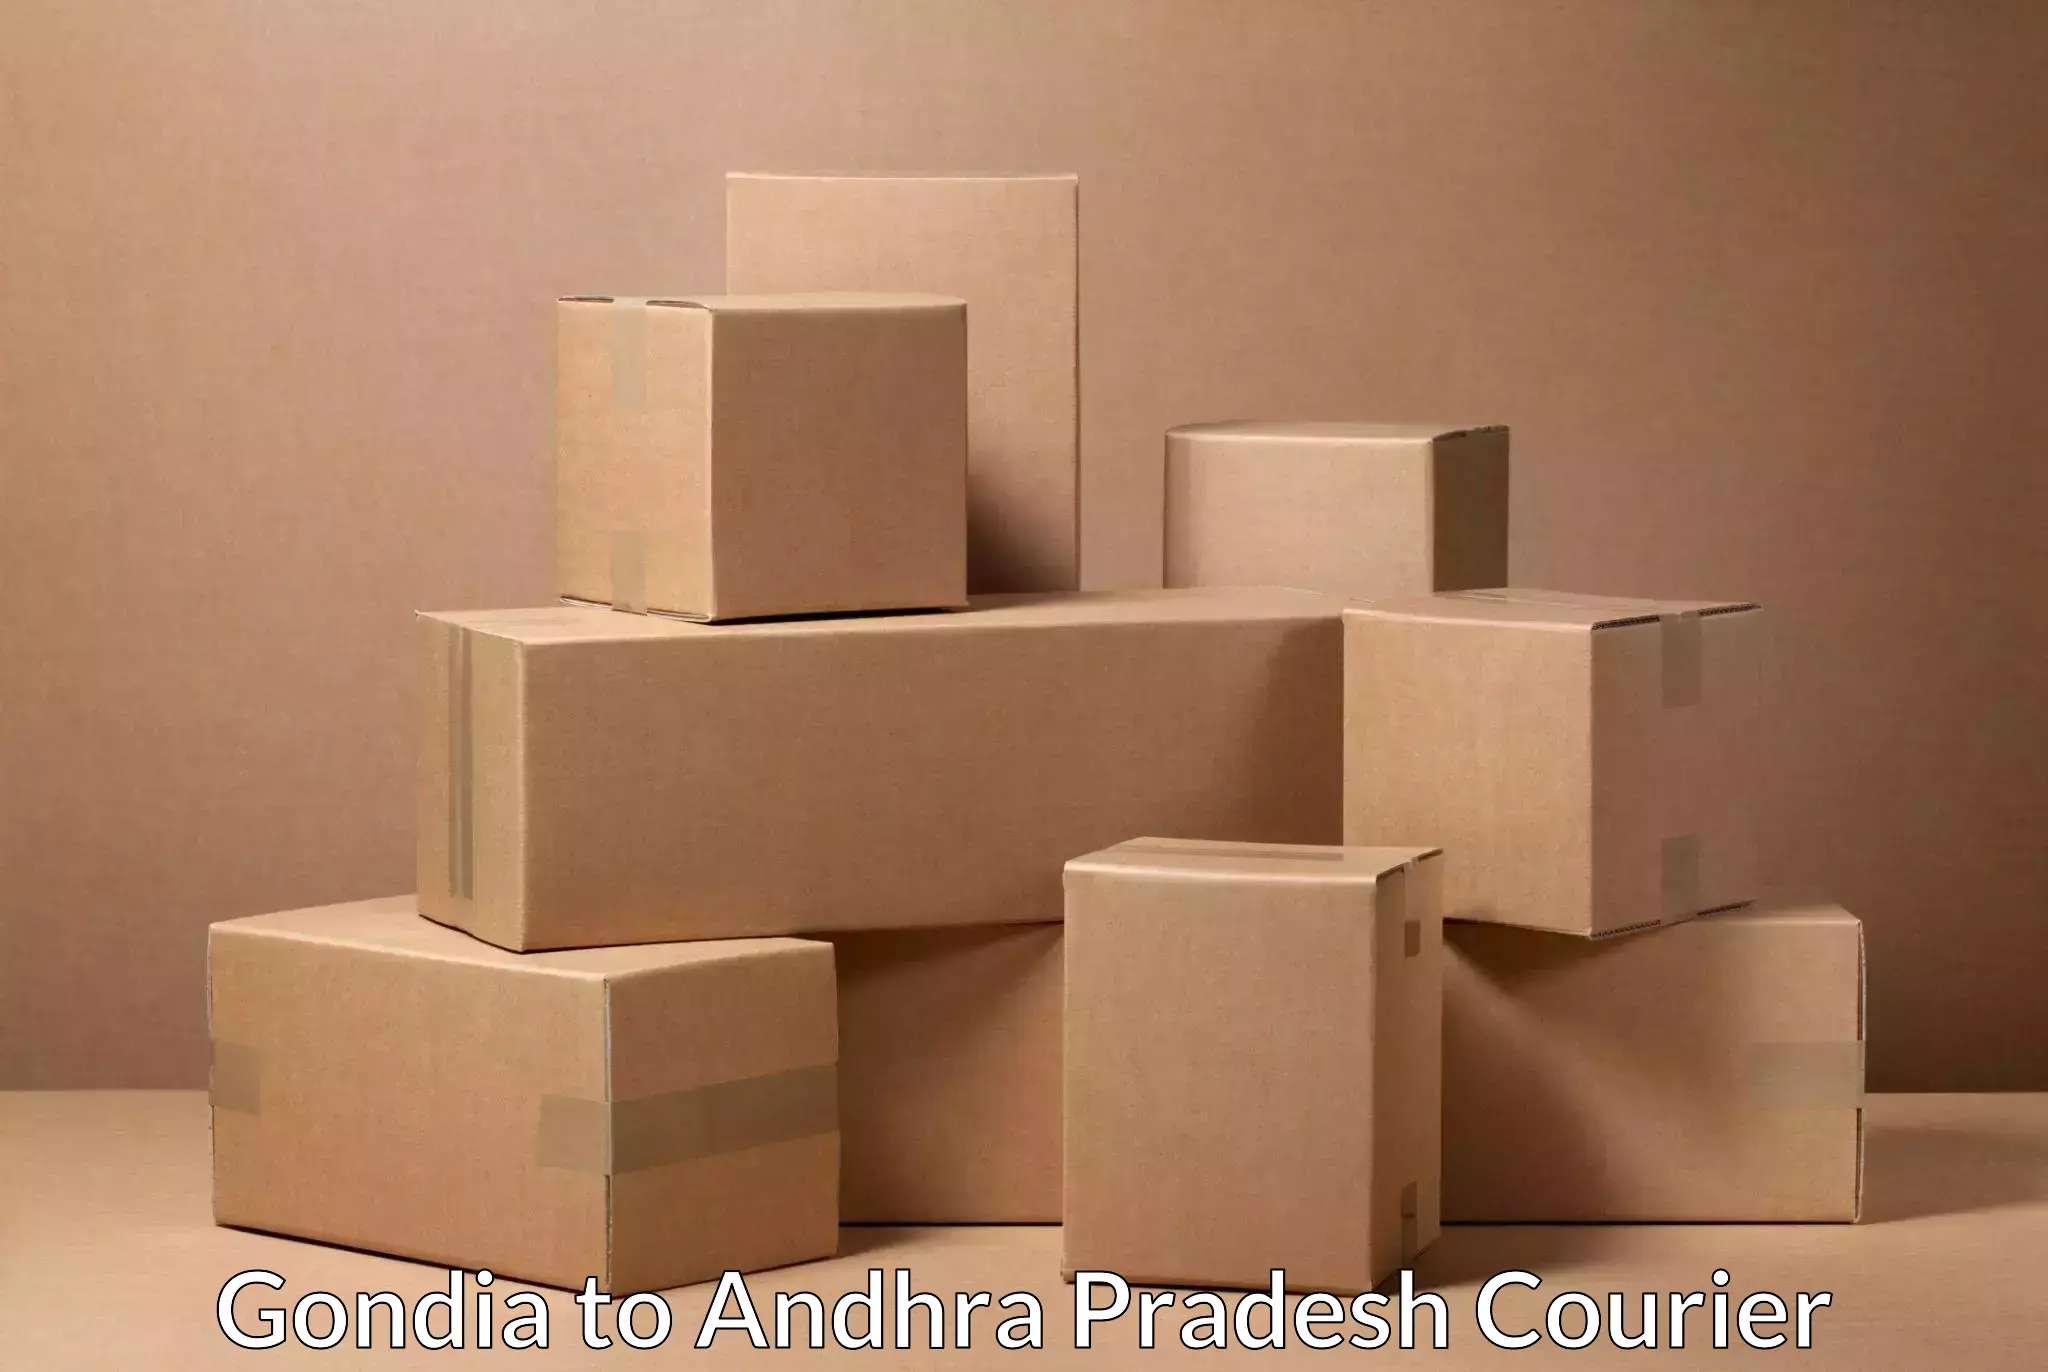 Flexible delivery scheduling Gondia to Gudivada